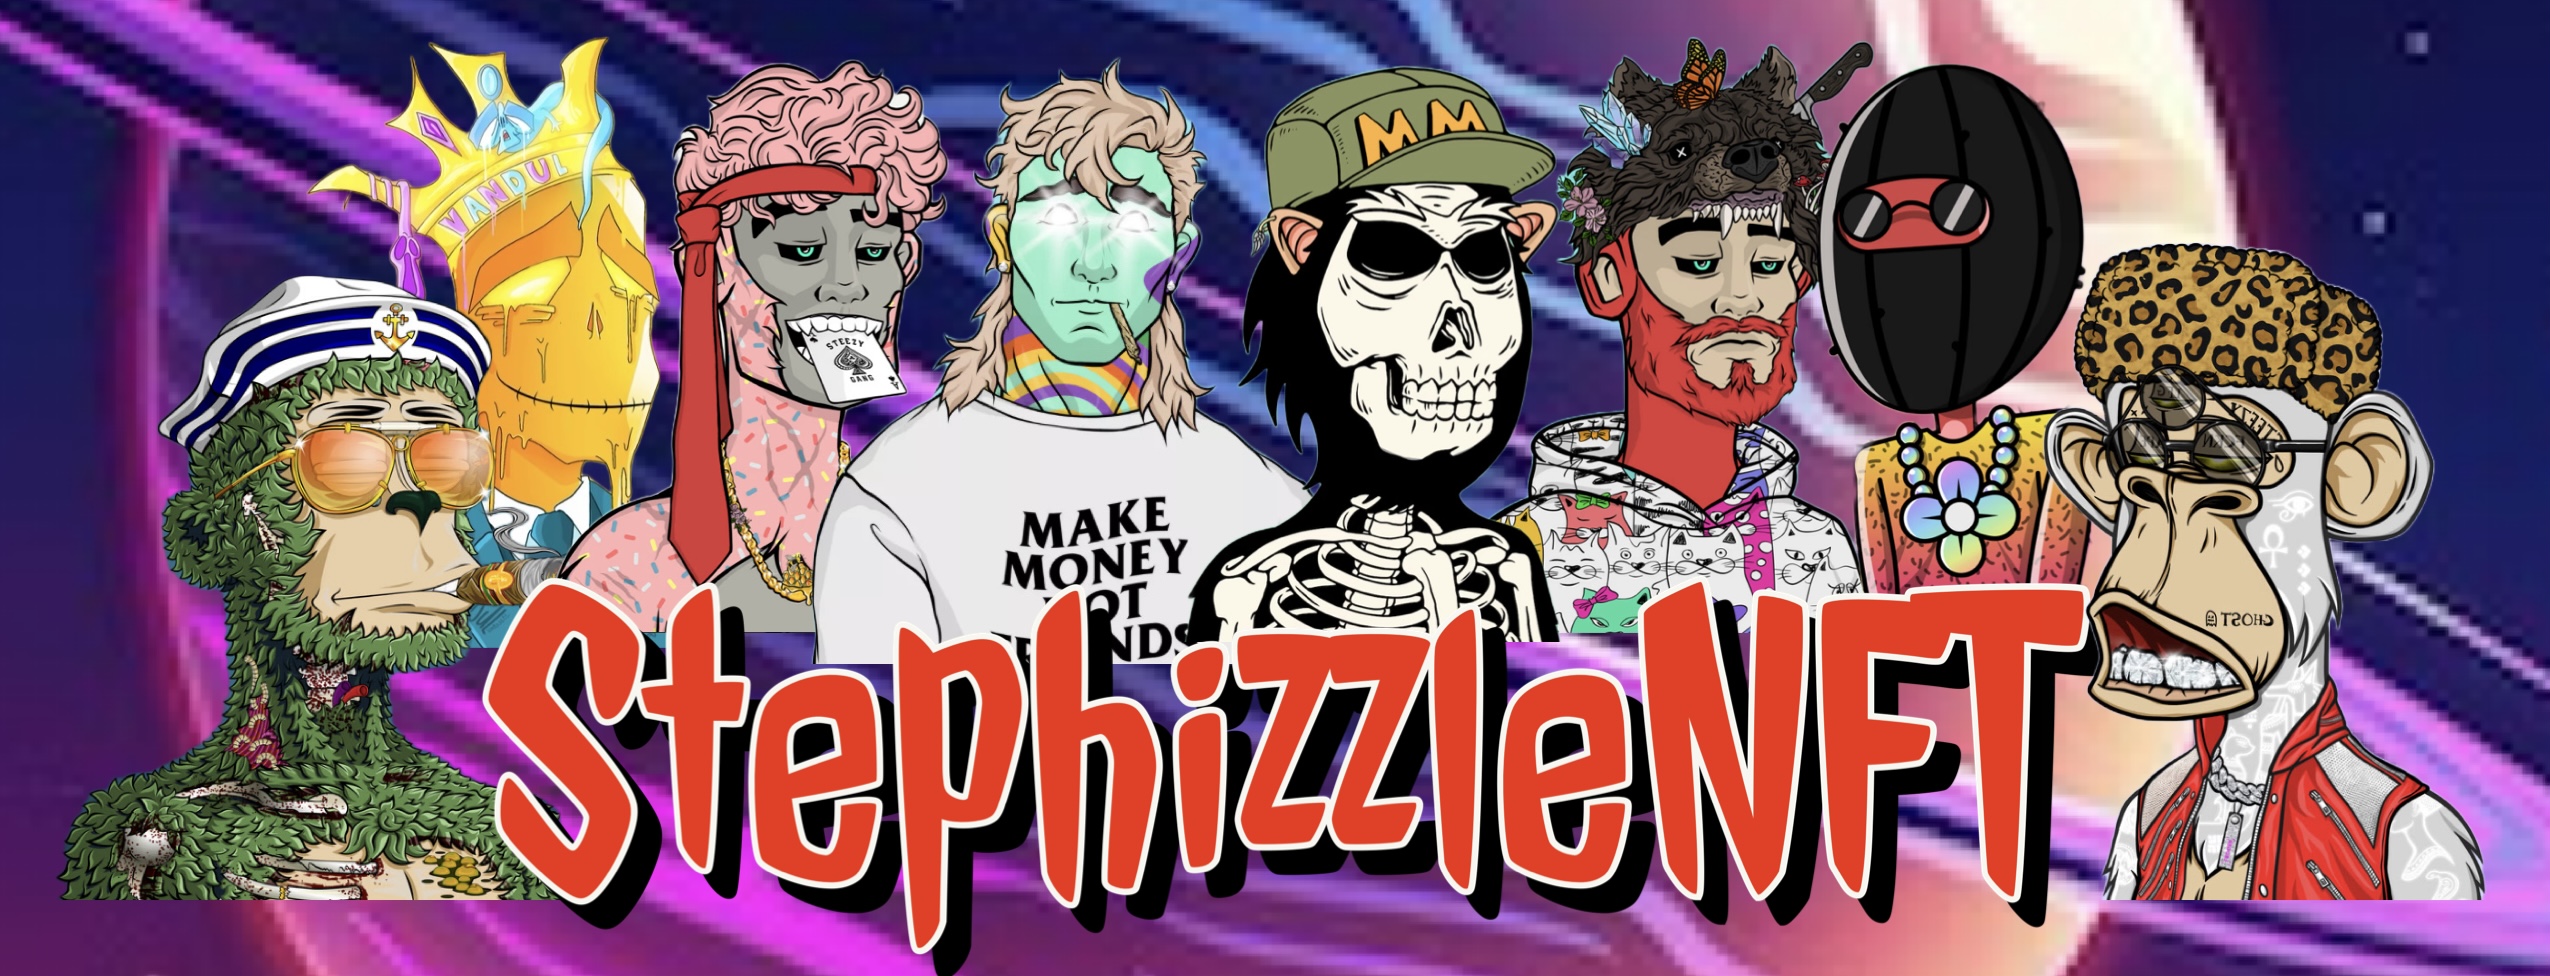 Stephizzle banner